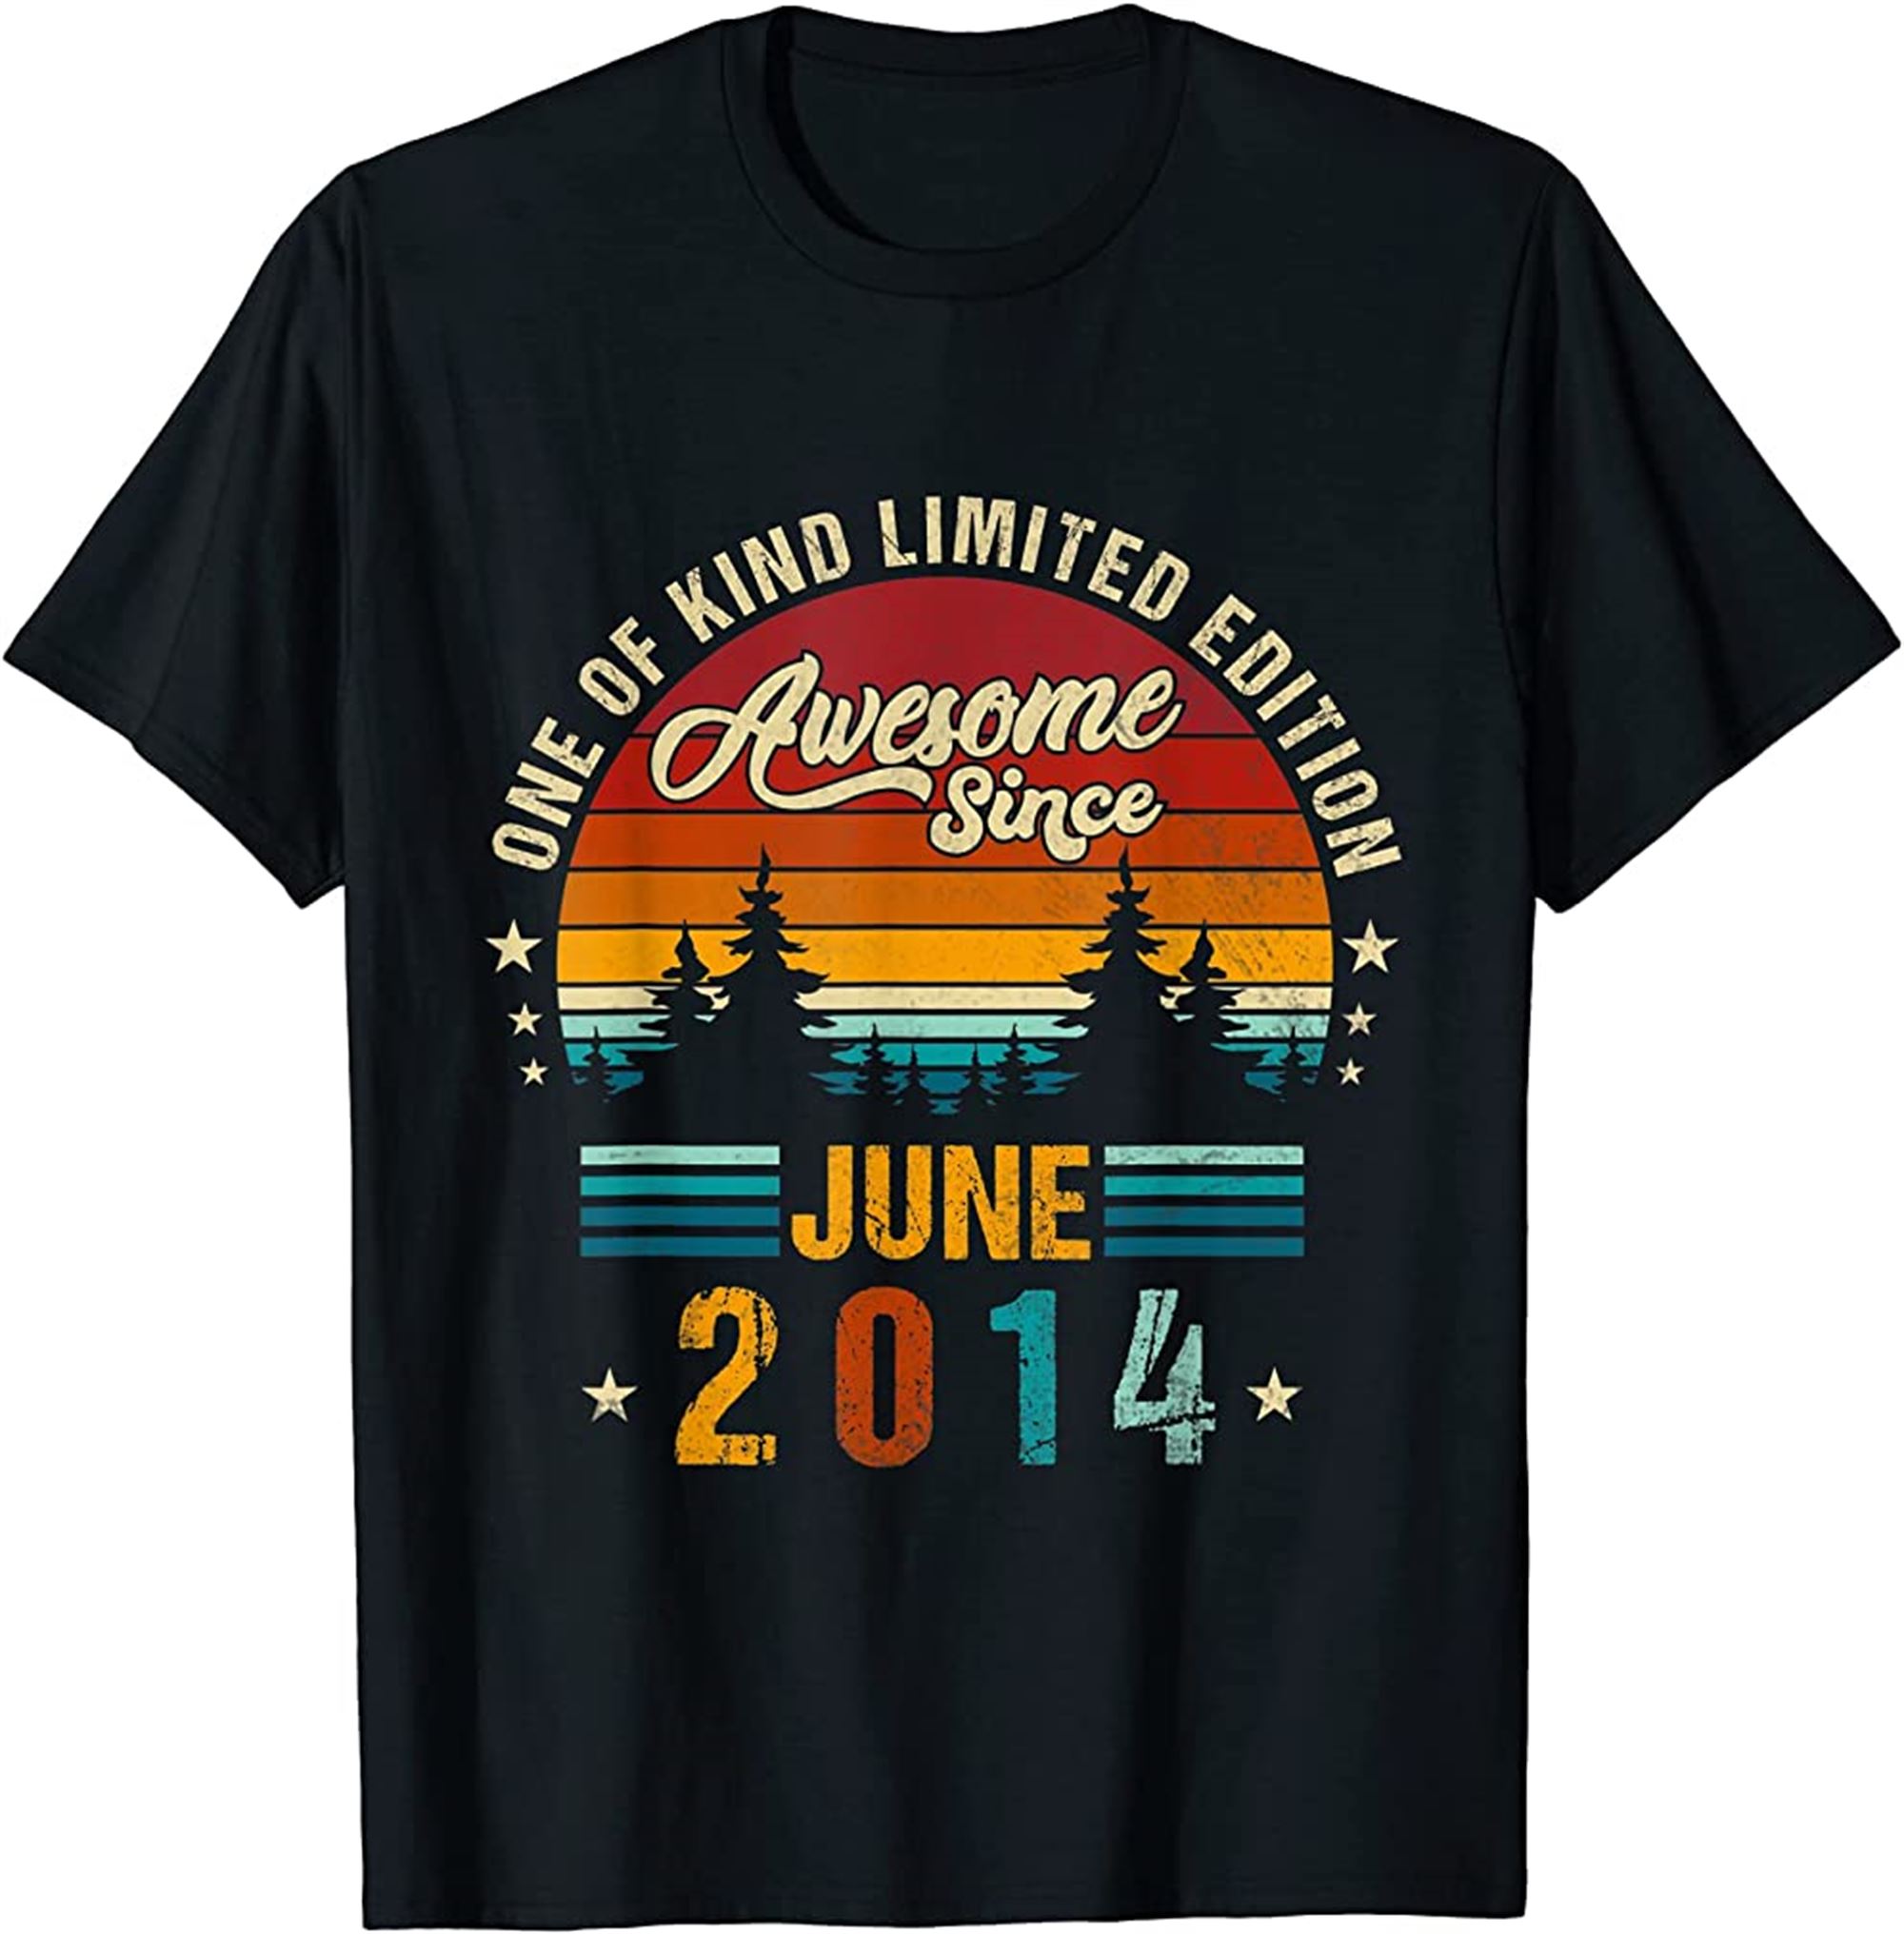 Vintage 8th Birthday Awesome Since June 2014 Epic Legend T-shirt Size Up To 5xl